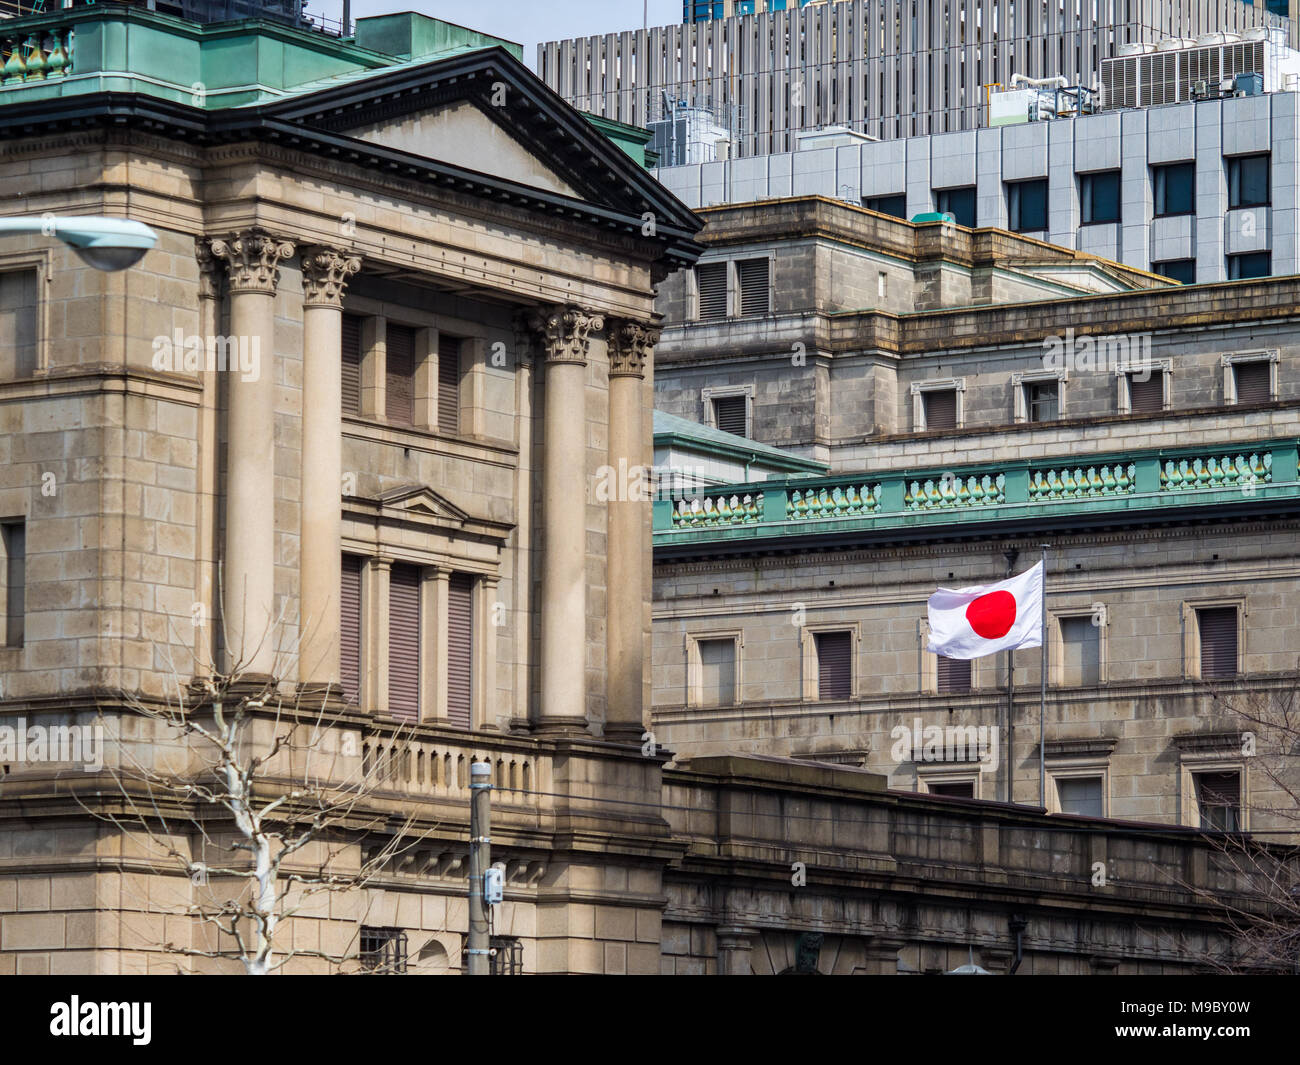 Bank of Japan, the Japanese Central Bank also called Nichigin, in Tokyo Japan. established 1882. Stock Photo